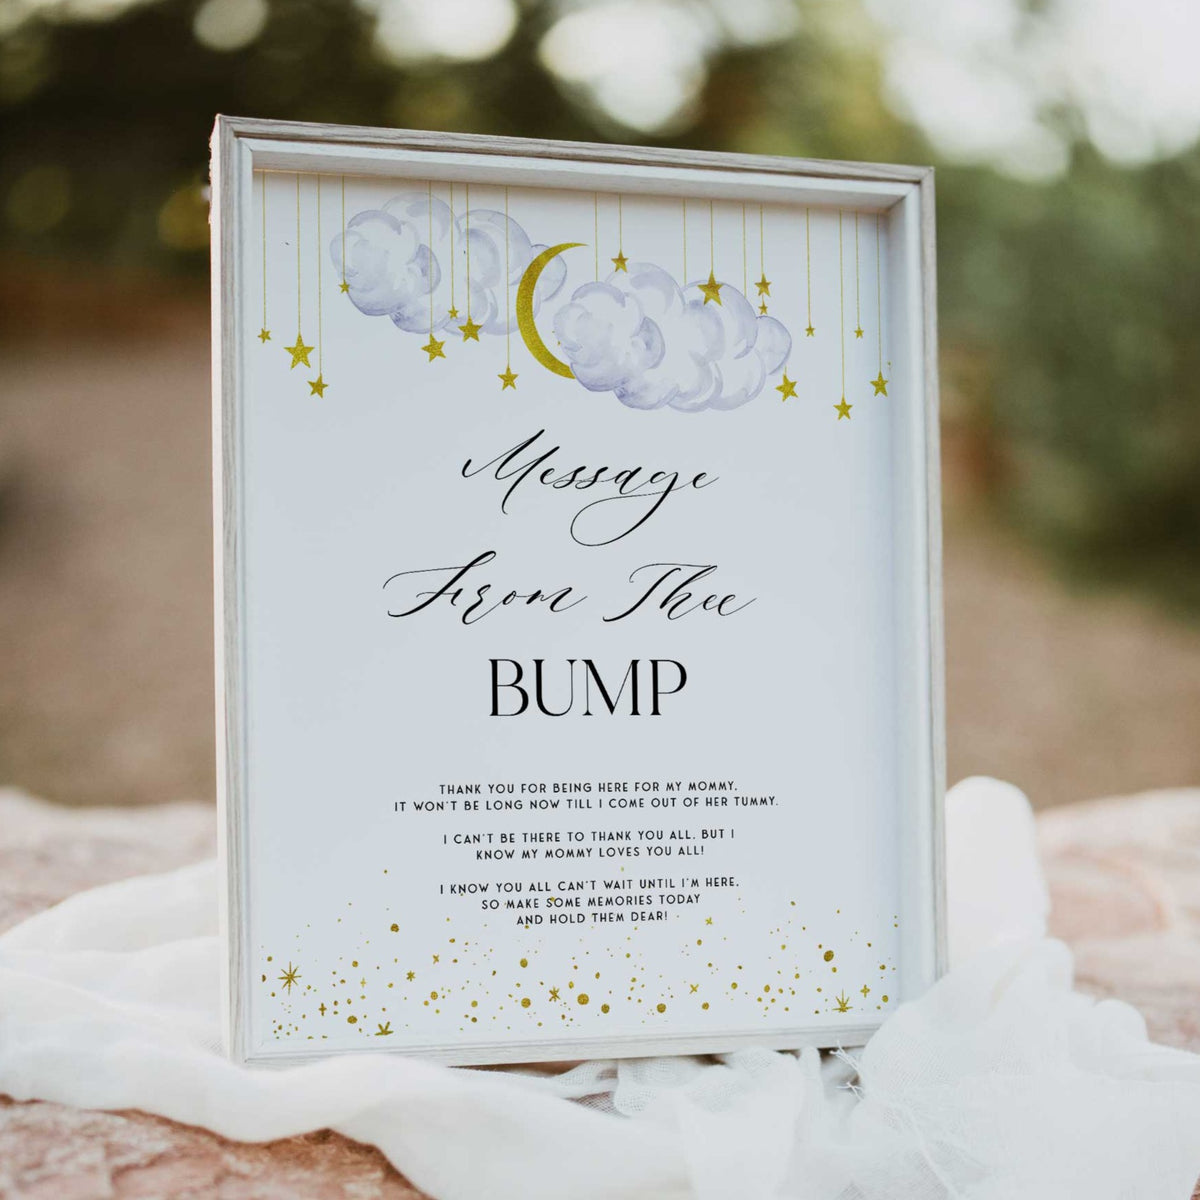 Fully editable and printable baby shower message from the bump game with a little star design. Perfect for a Twinkle Little Star baby shower themed party